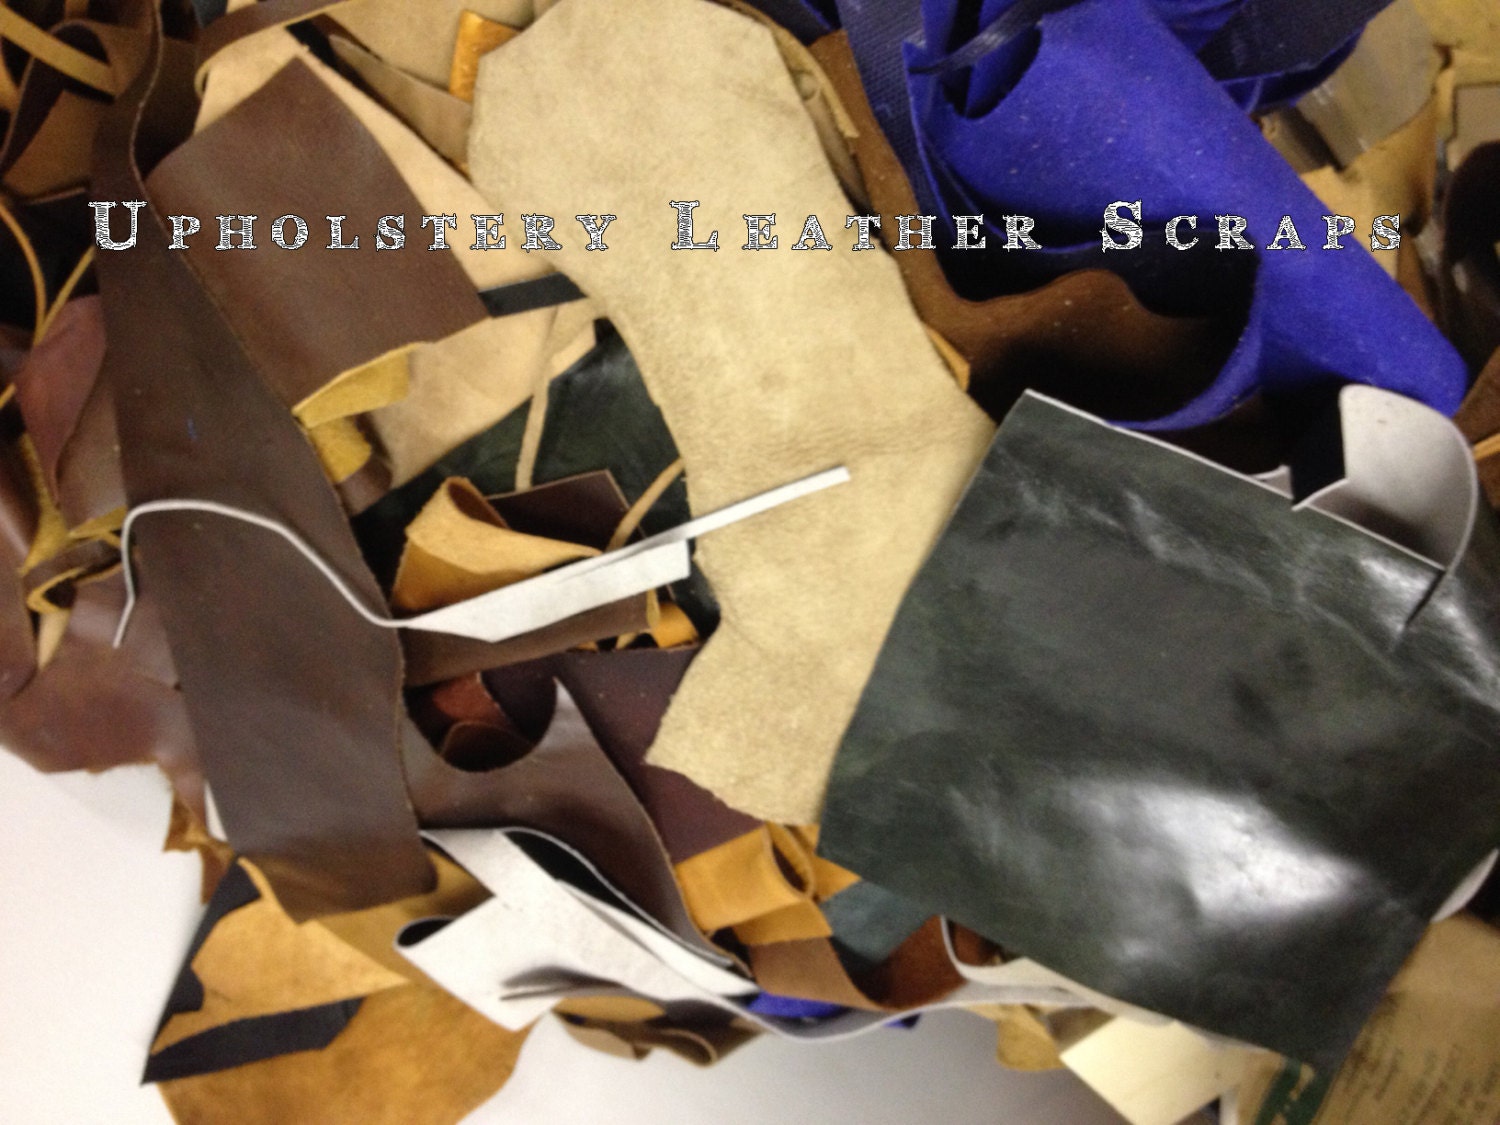 Sale 1 Lb Sm-med Brown Scrap Leather Pieces for Jewelry,leather Remnants,leather  Scraps for Crafts,scrap Leather for Purses,leather Destash 